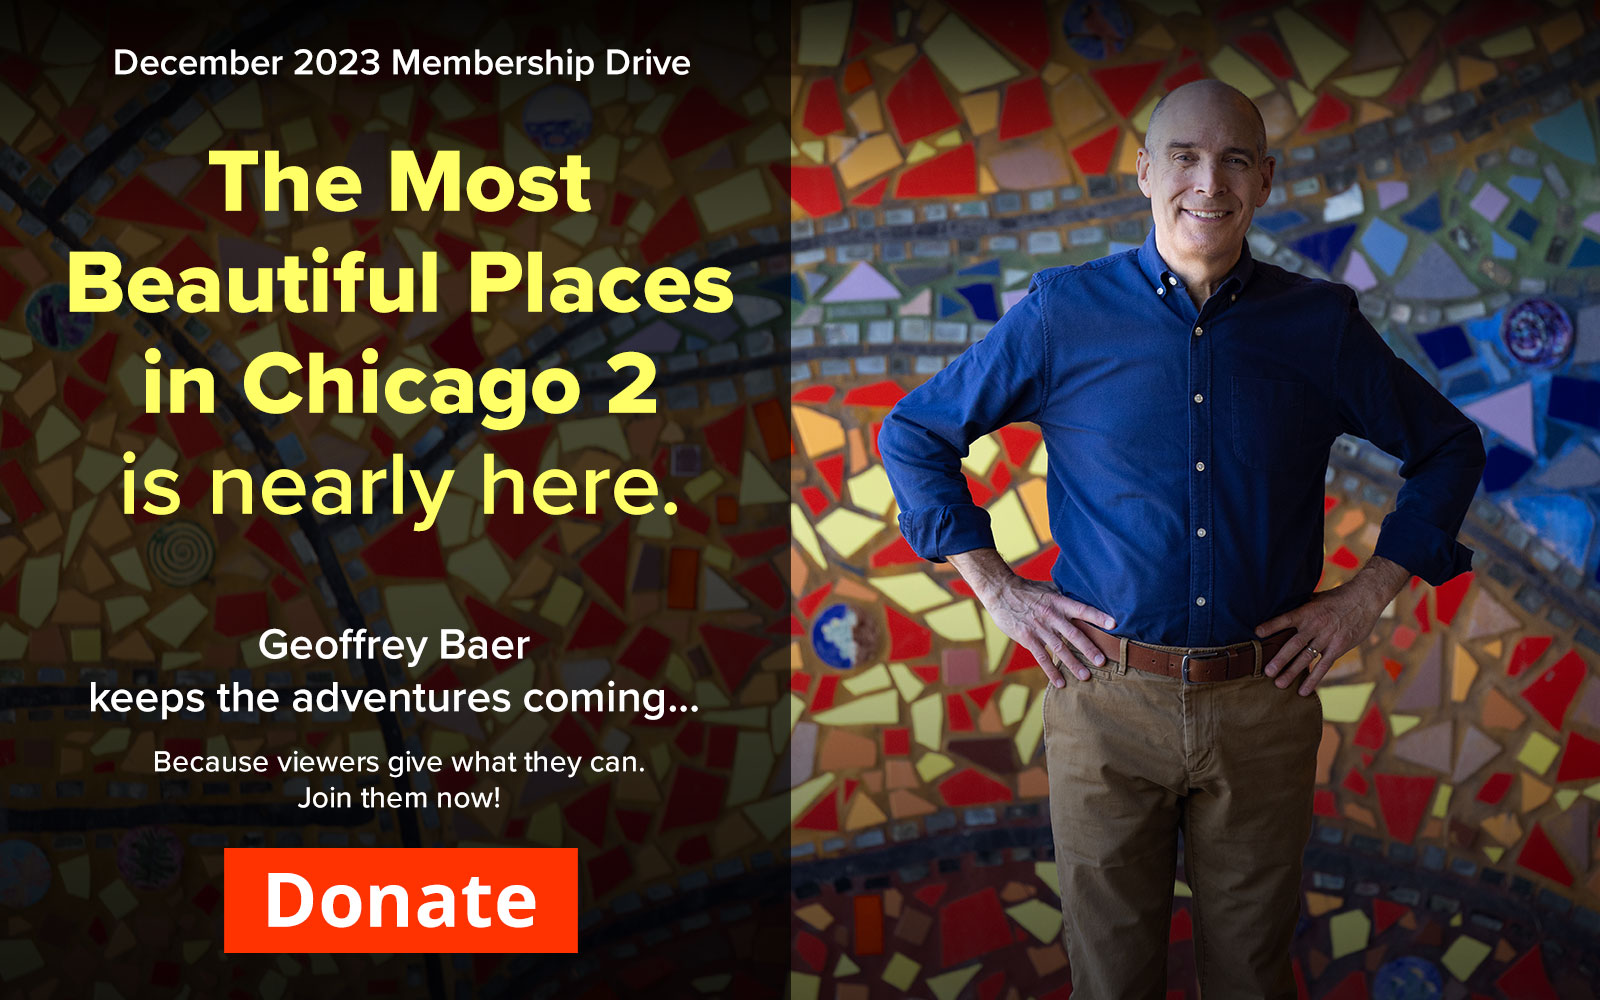 The Most Beautiful Places in Chicago 2 is nearly here, donate today!